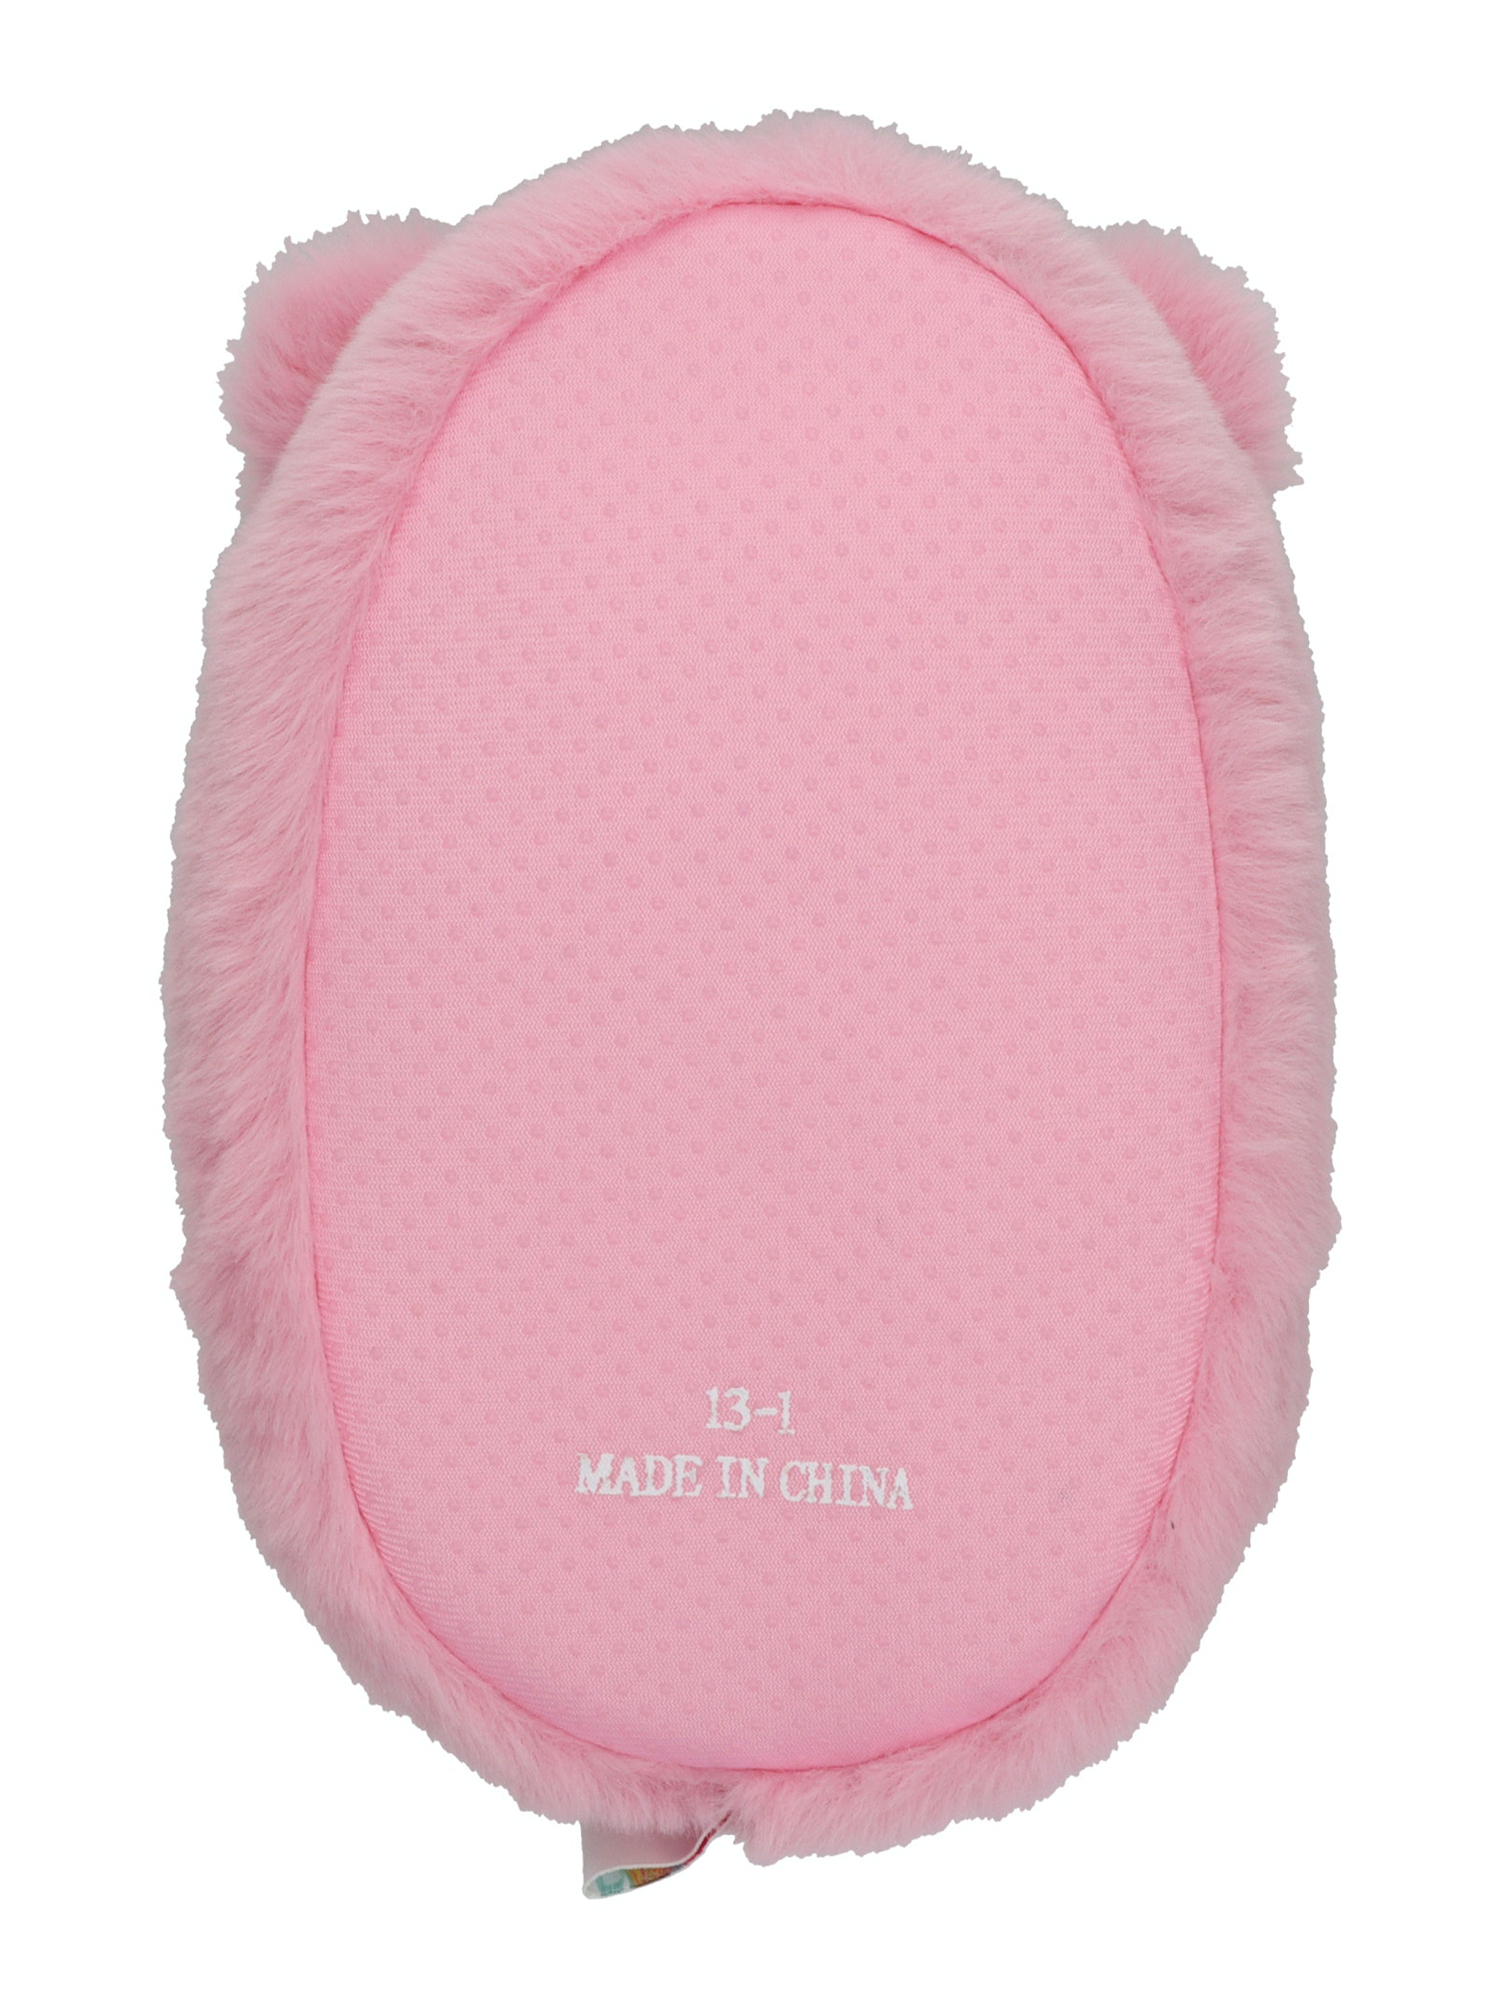 Squishmallows Toddler & Kids Anu the Hamster Slipper - image 5 of 6